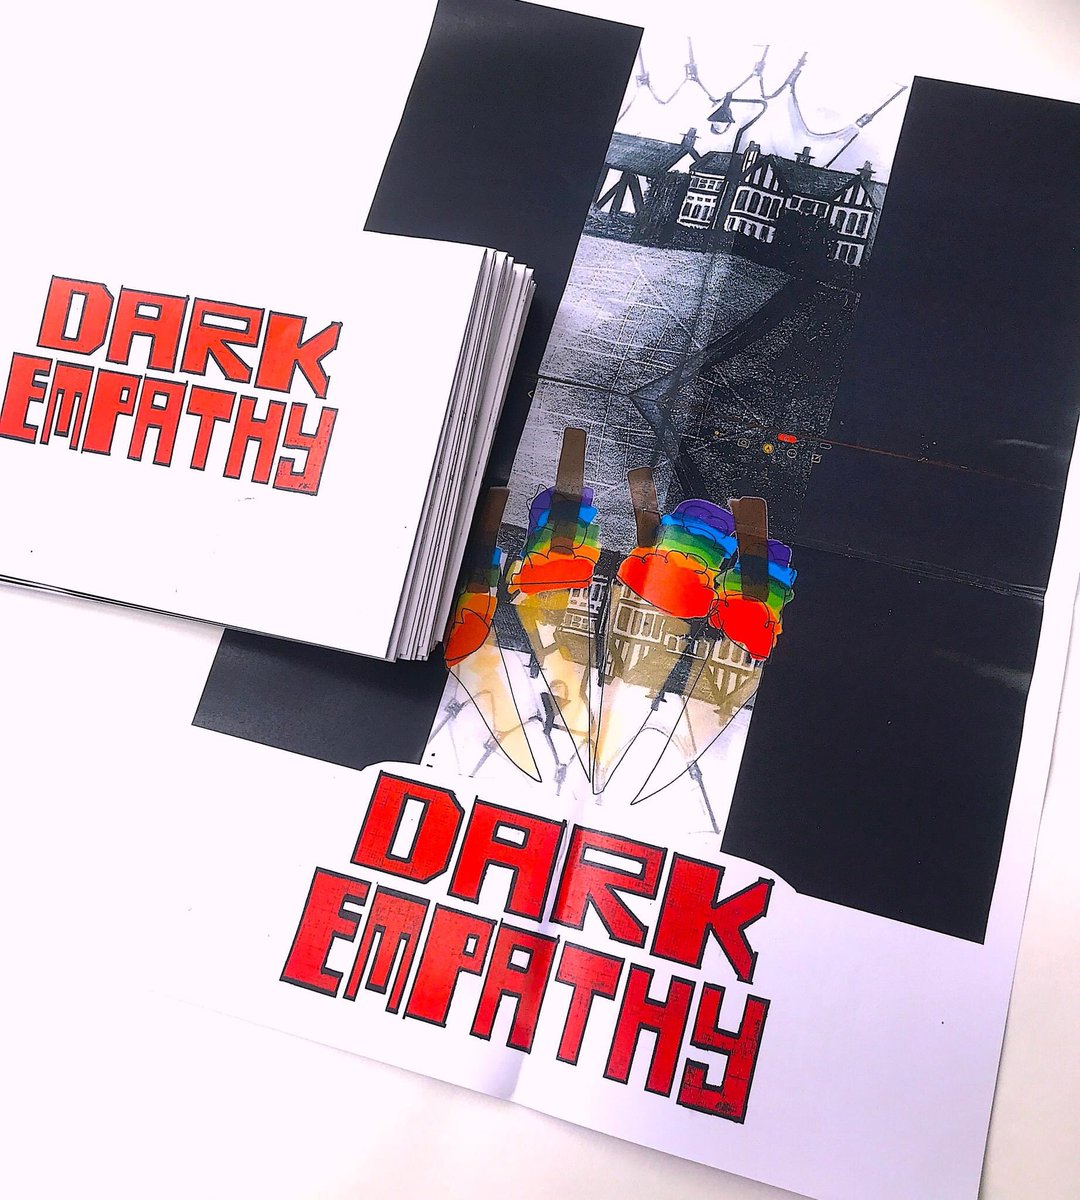 Excited to be presenting my two year project 'Empathy in Action' tomorrow @peckhamlevels Here is my zine 'Dark Empathy'. This project has has included some wonderful contributions so far from @beatemurnau @DanielAndClara @PipMac6 and members of @UALPGCommunity @UALEPRG @UALTLE